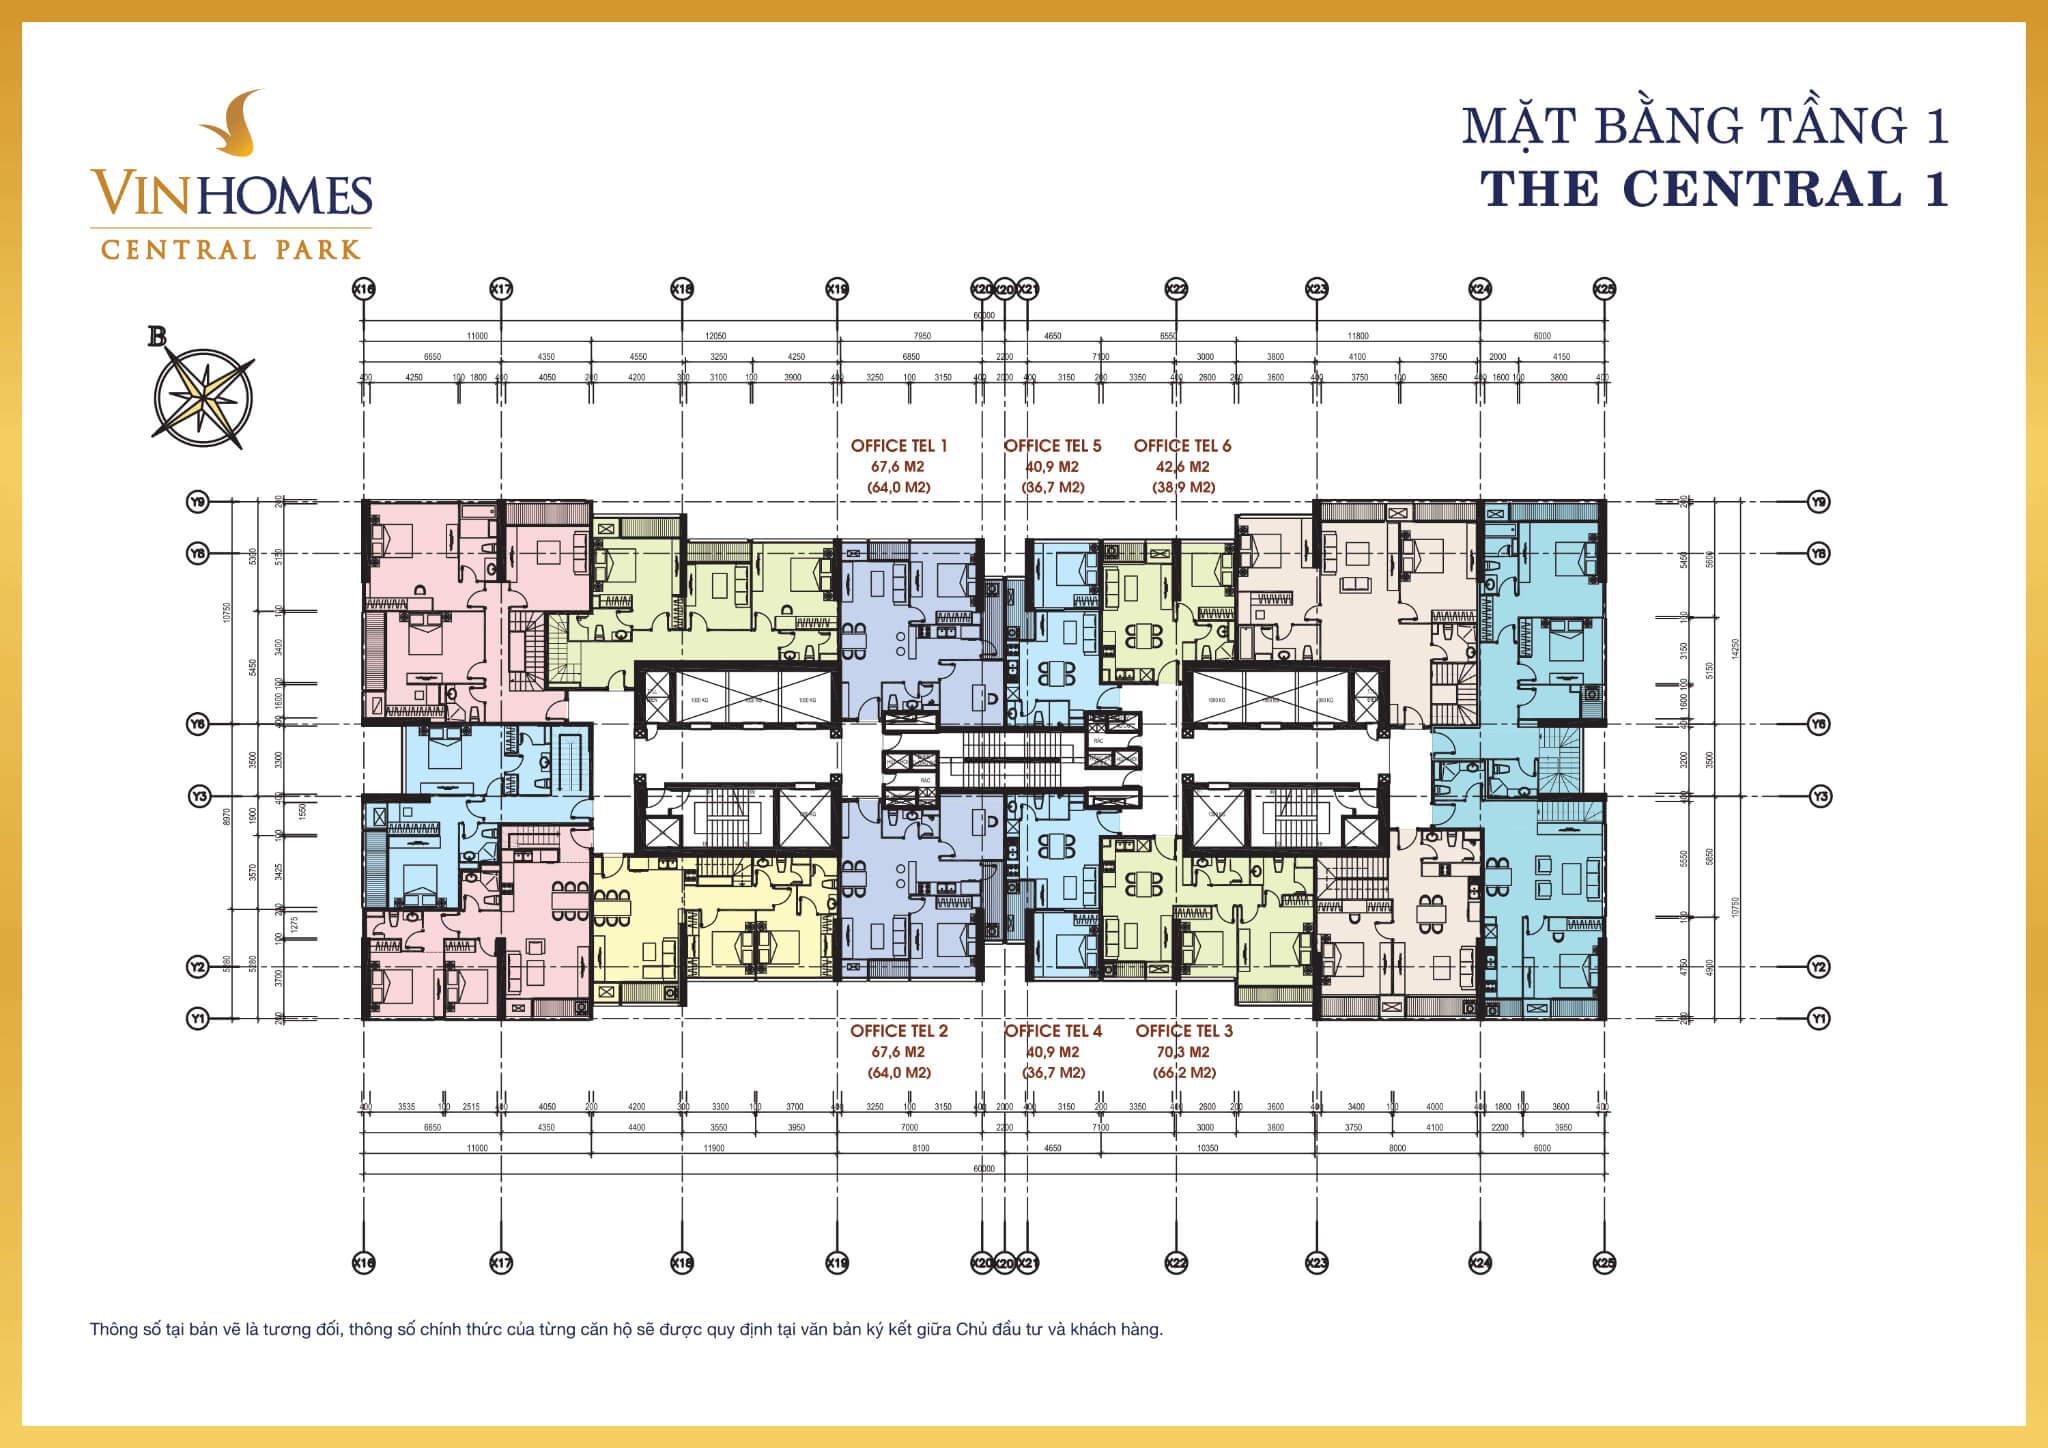 Mặt bằng layout tòa The Central 1 tầng 1 tại Vinhomes Central Park